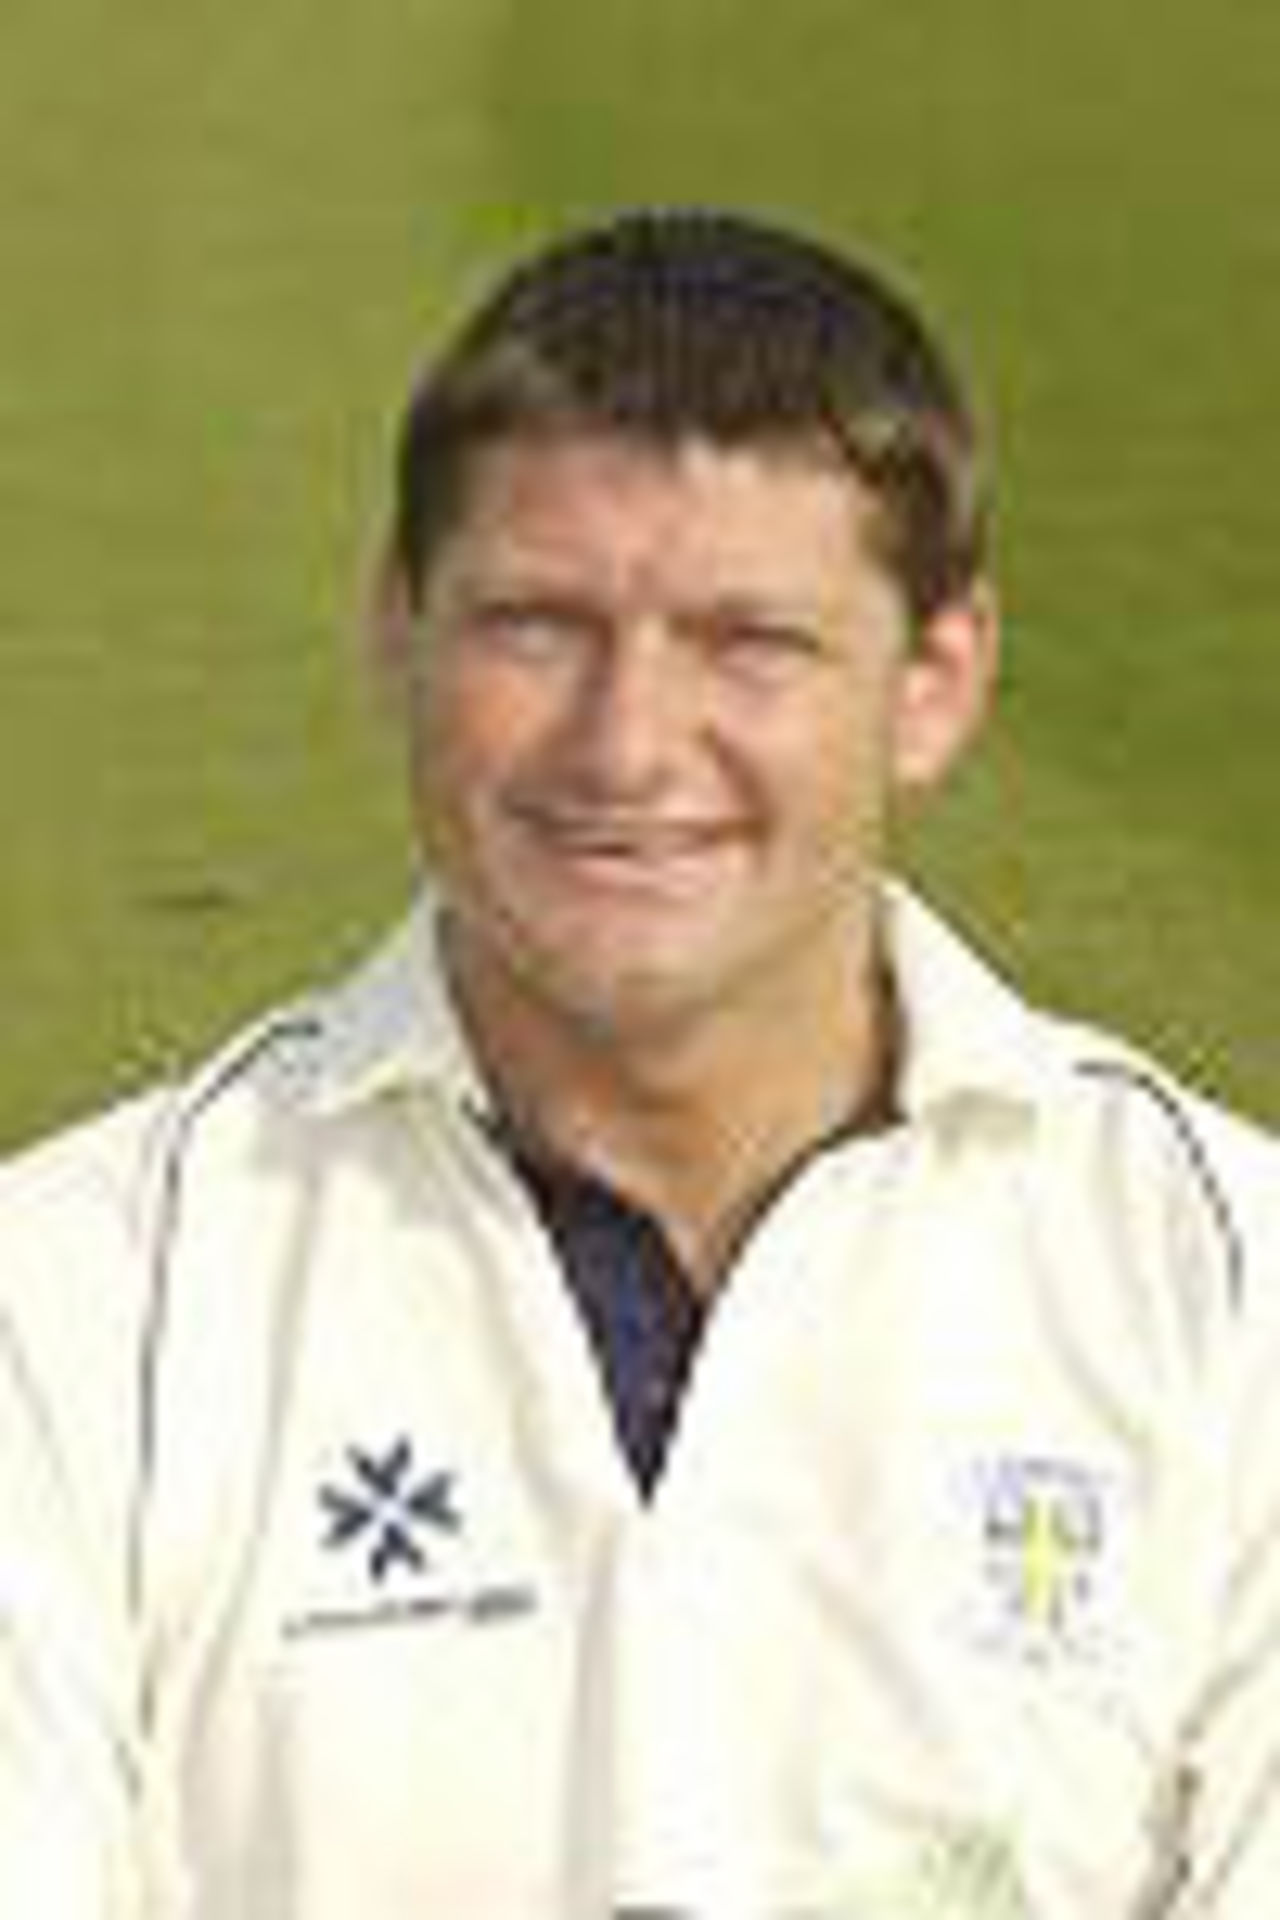 Taken at the 2002 Durham photocall